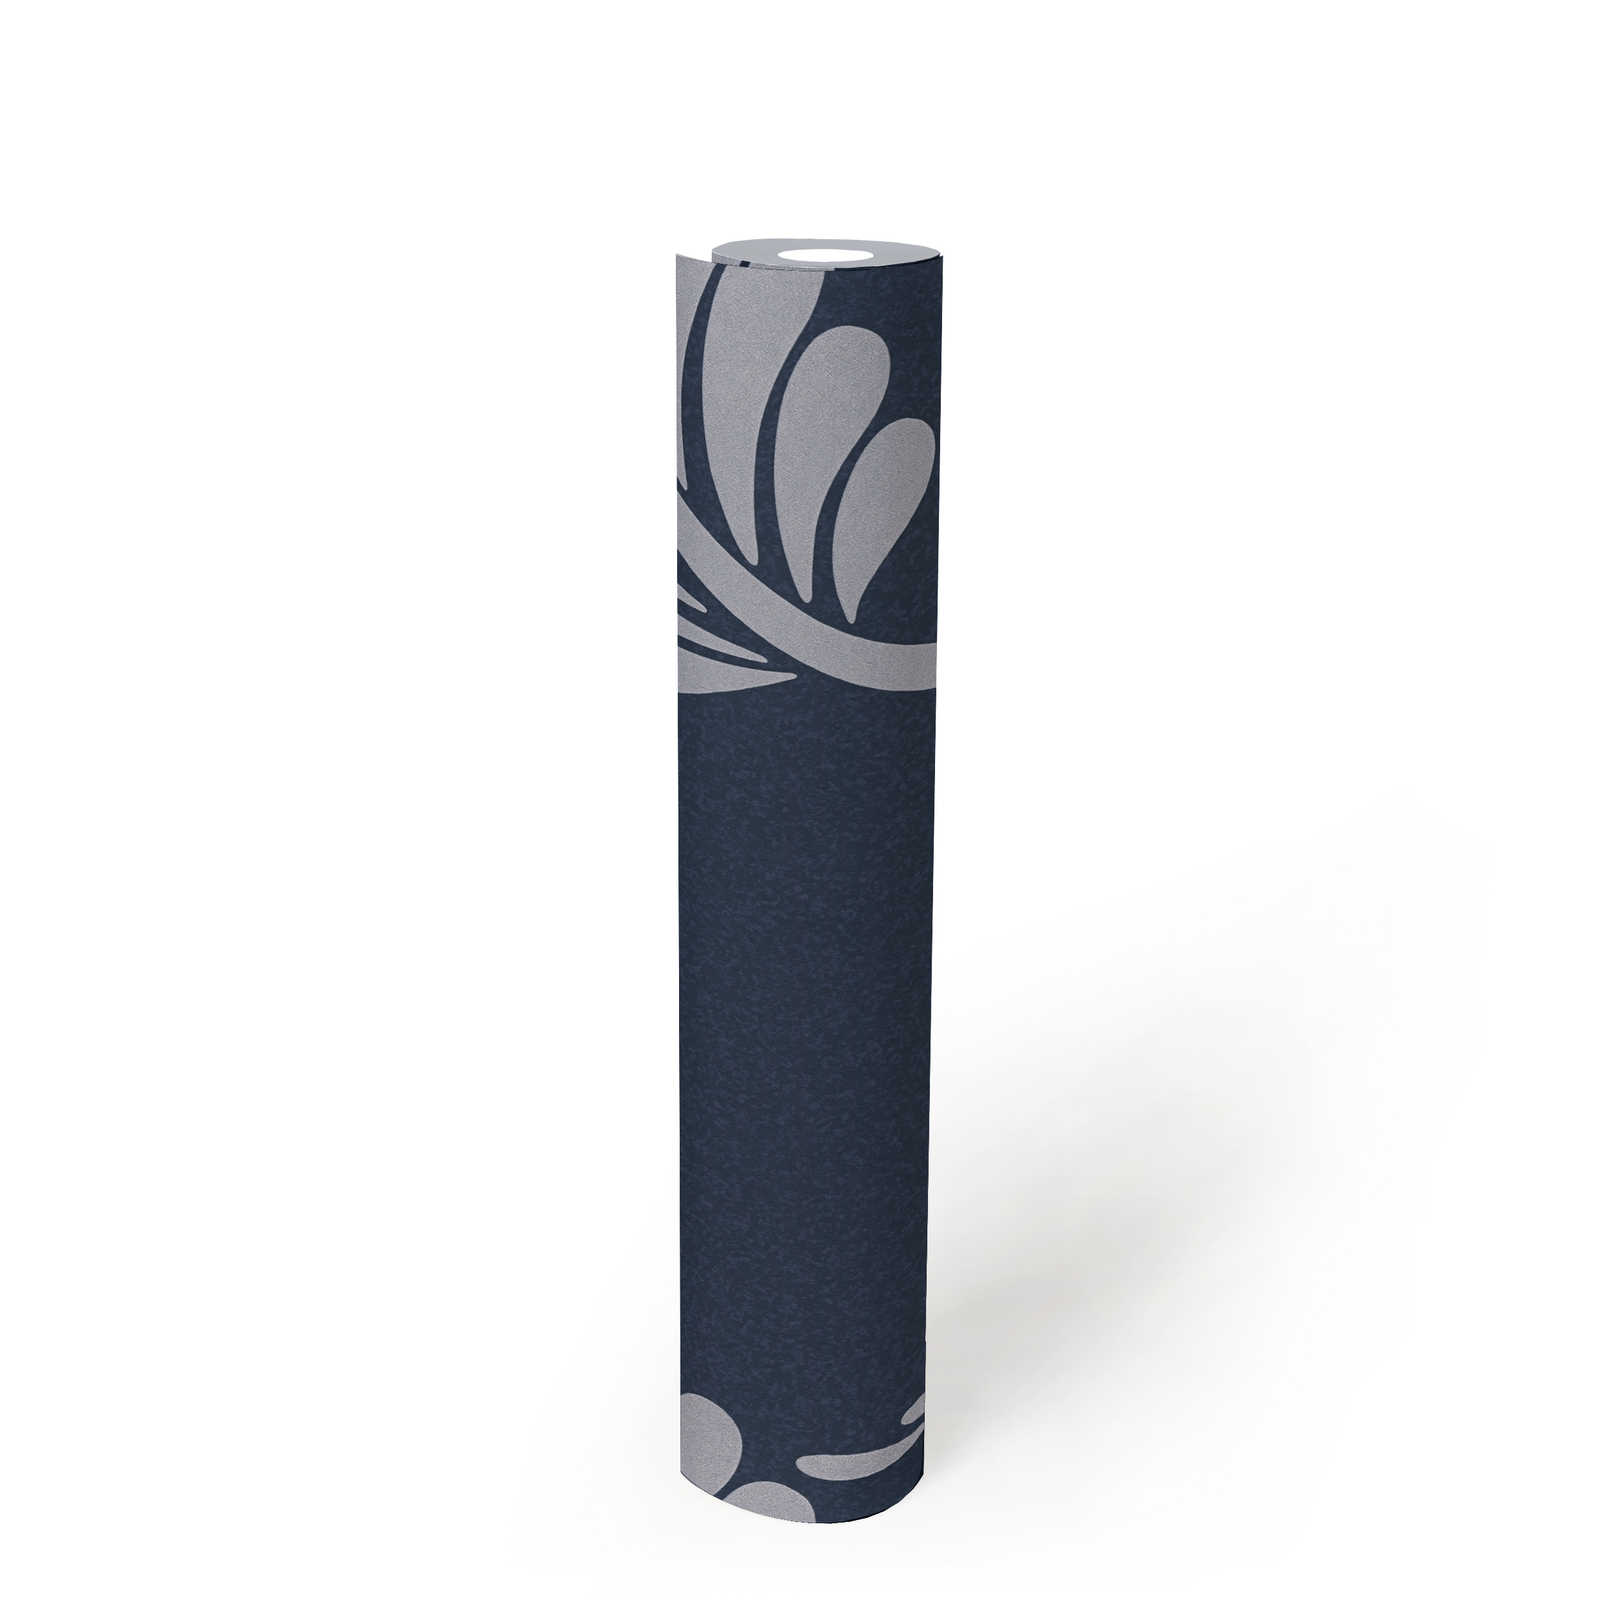             Floral paper wallpaper glossy with leaves - blue, silver
        